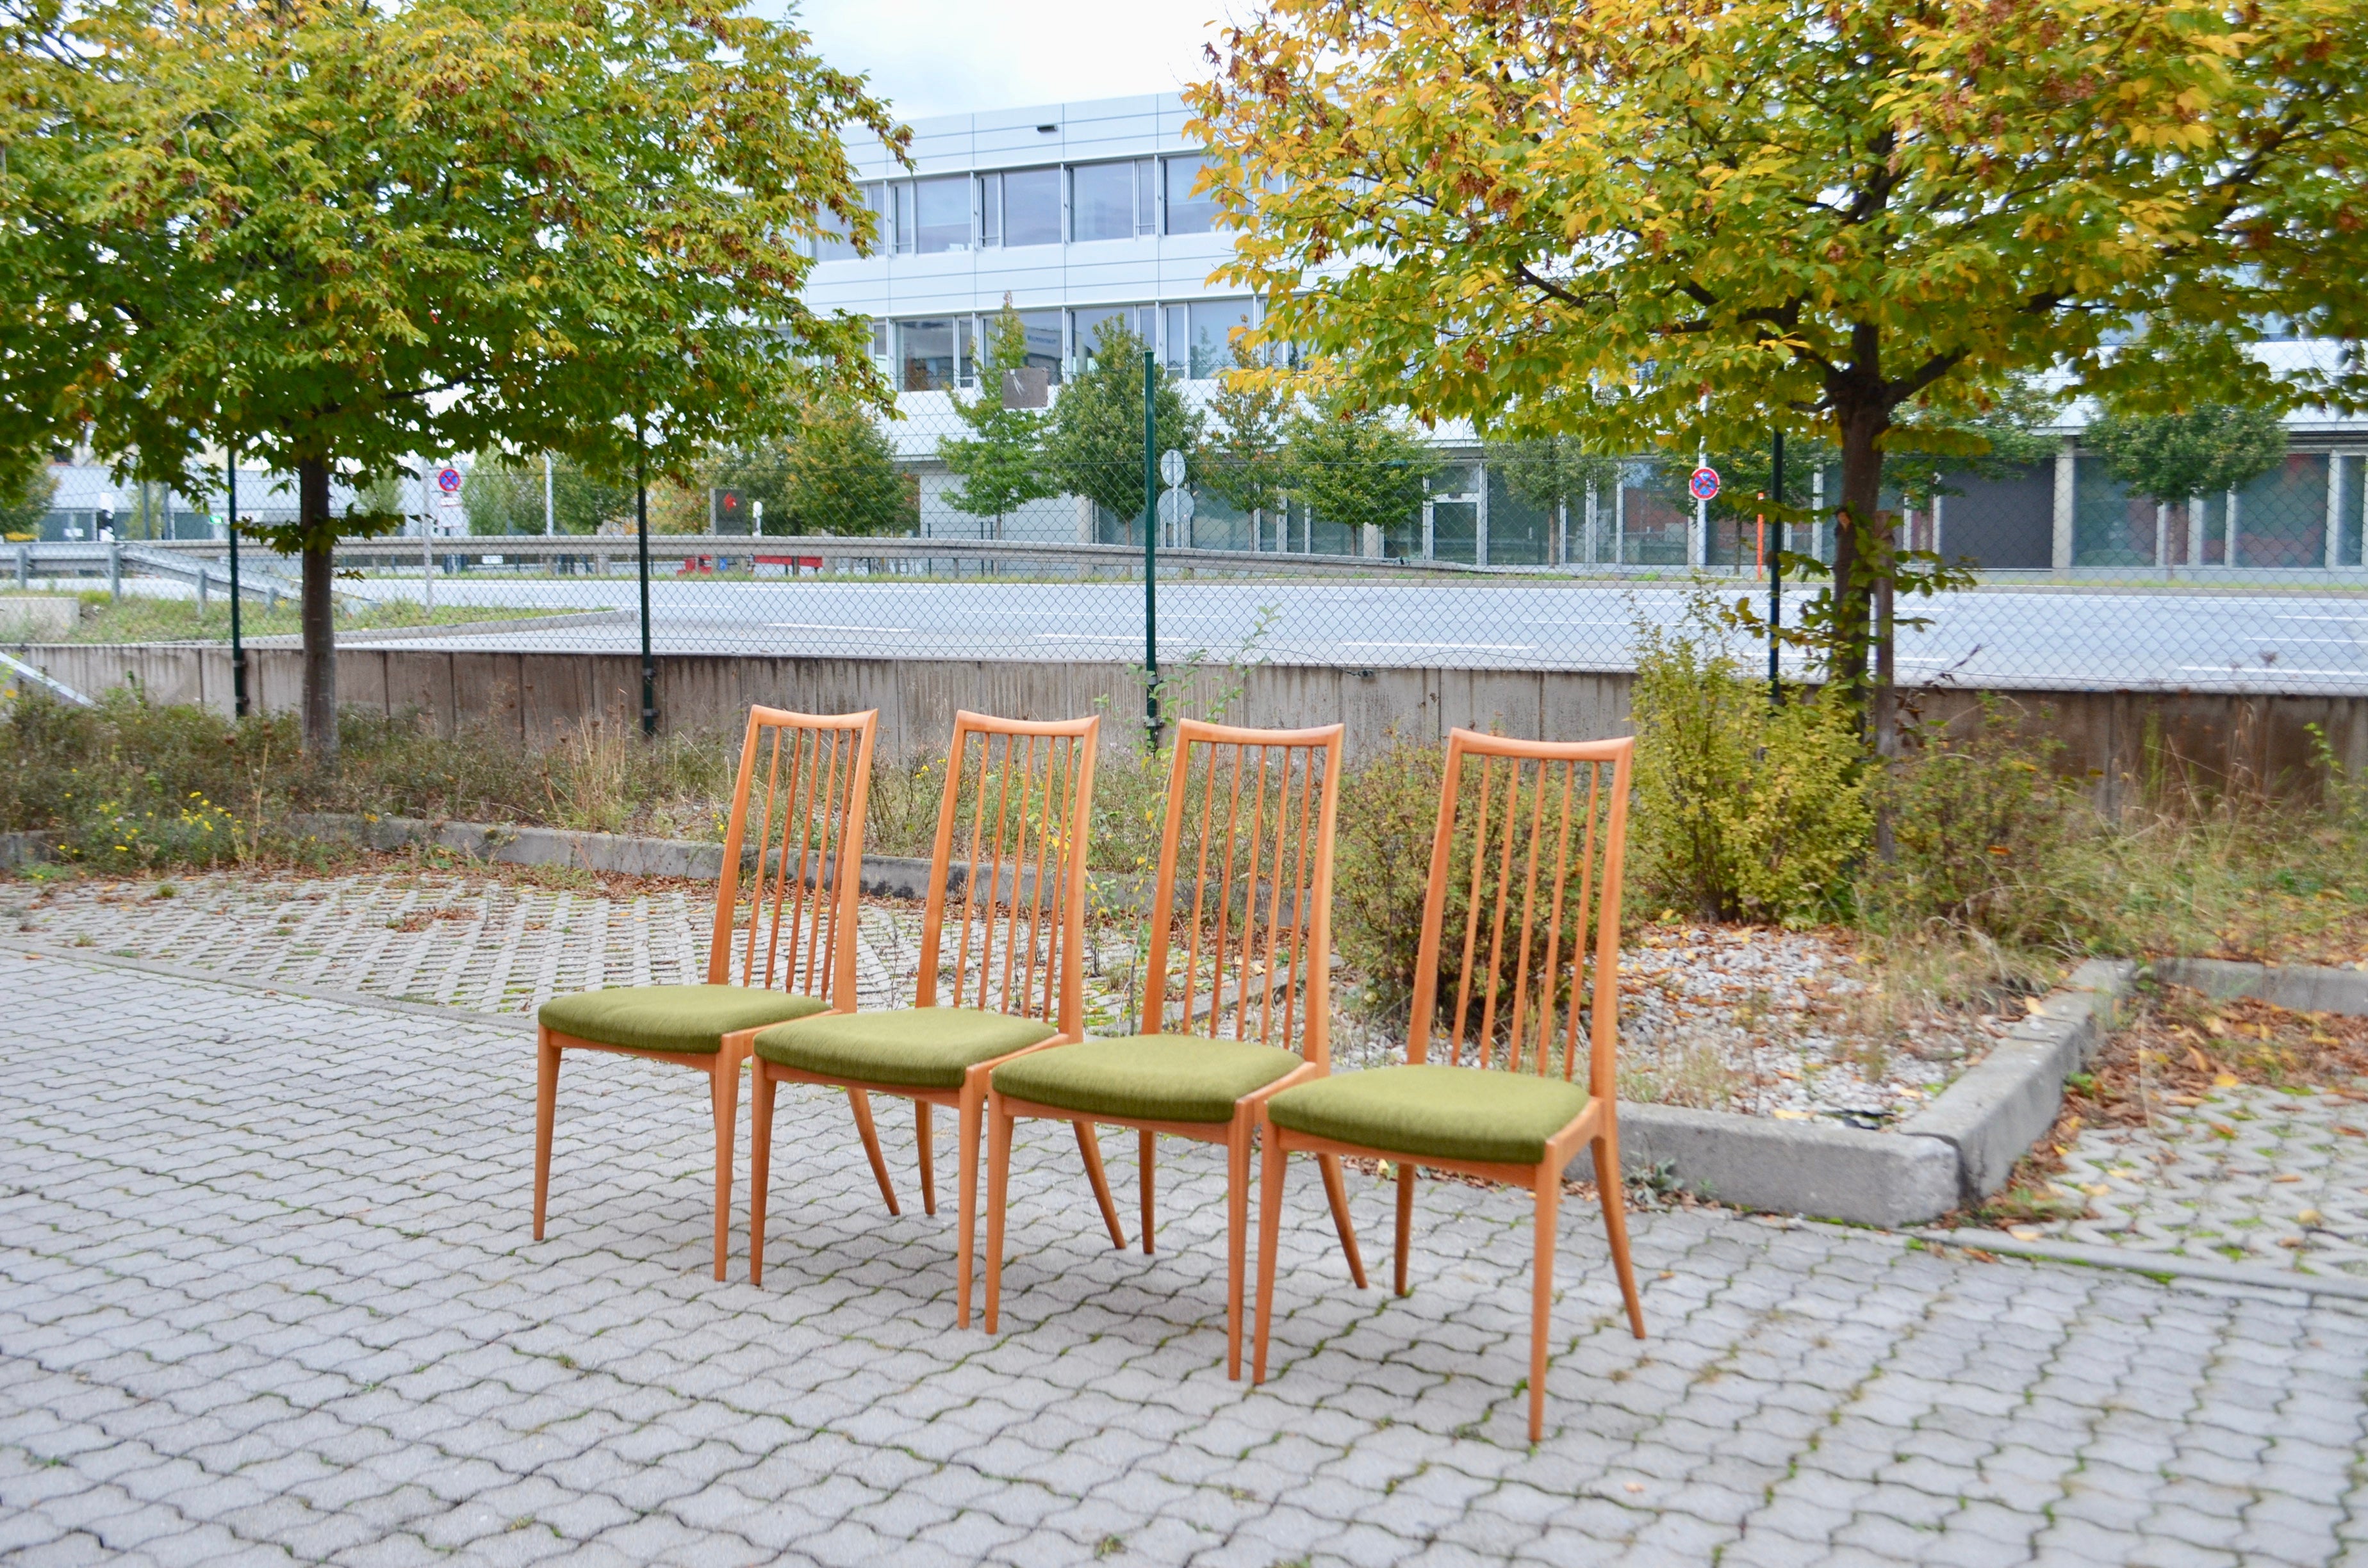 Ernst Martin Dettinger designed this sculptural dining chair.
Manufactured by Lucas Schnaidt in Germany in the 50ties
The frame is made of cherrywood.
The chairs are in good condition.
The fabric is mossgreen.
Set of 4.